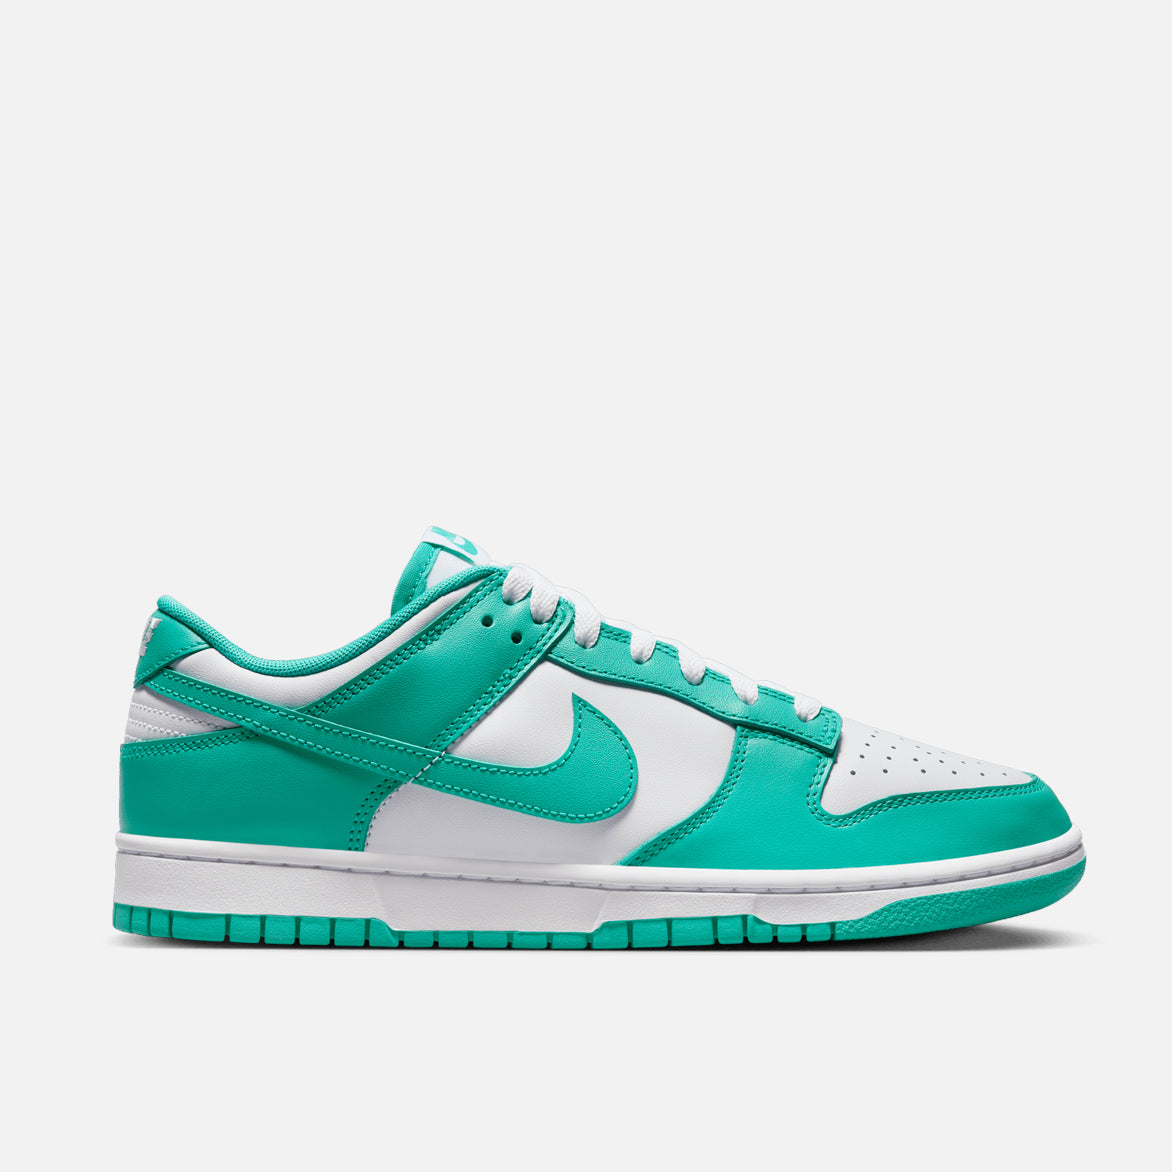 DUNK LOW RETRO "CLEAR JADE"